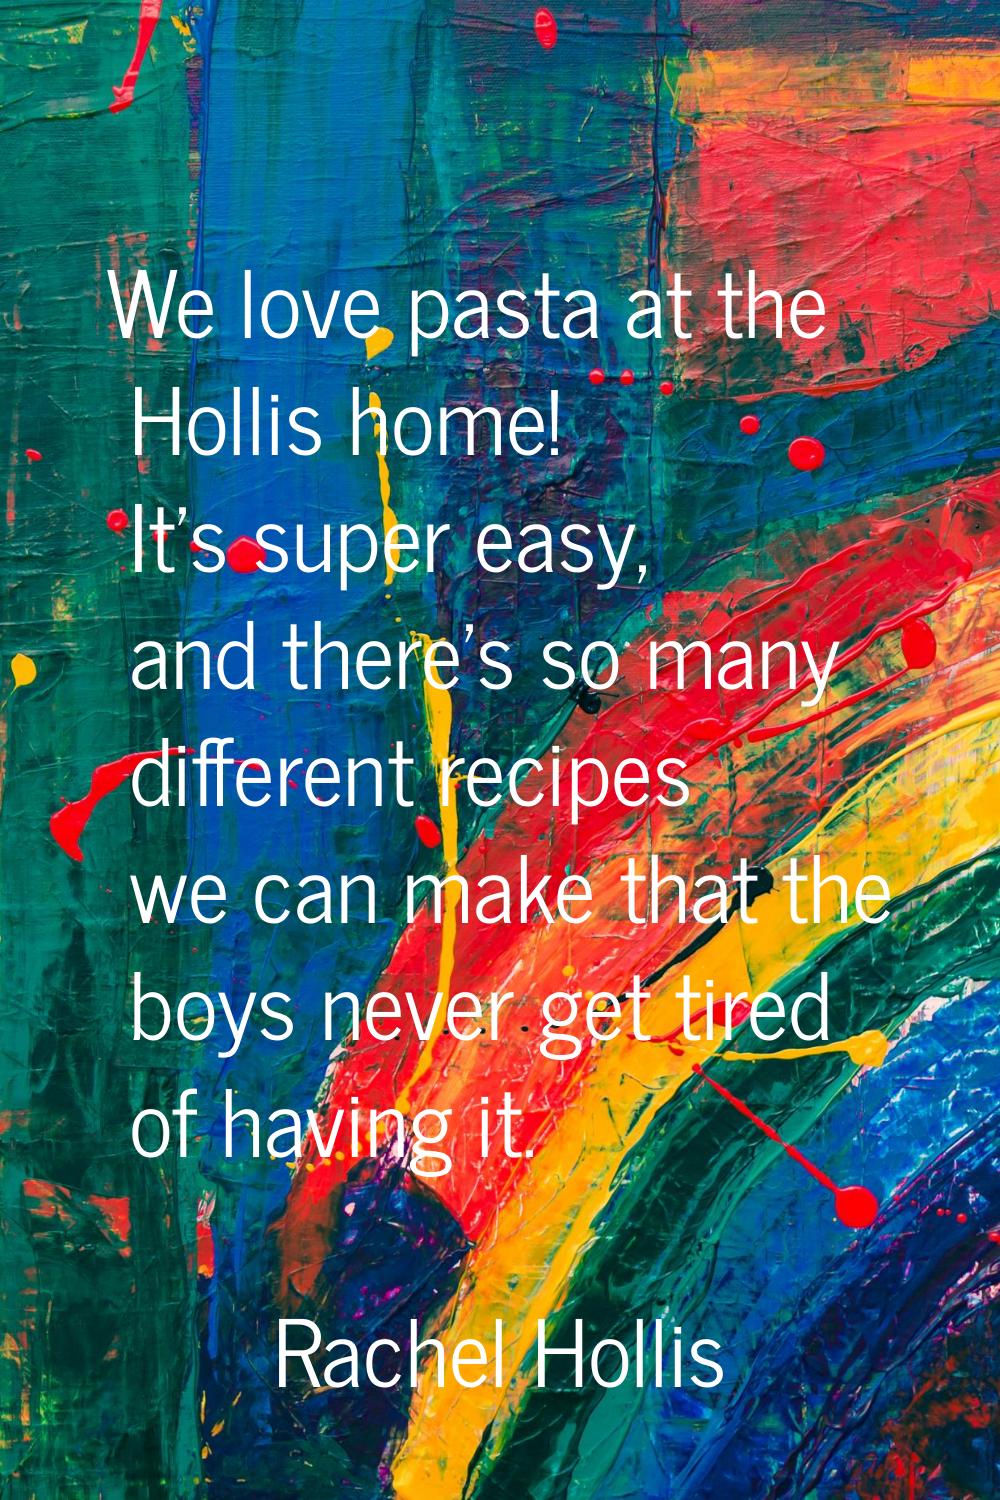 We love pasta at the Hollis home! It's super easy, and there's so many different recipes we can mak